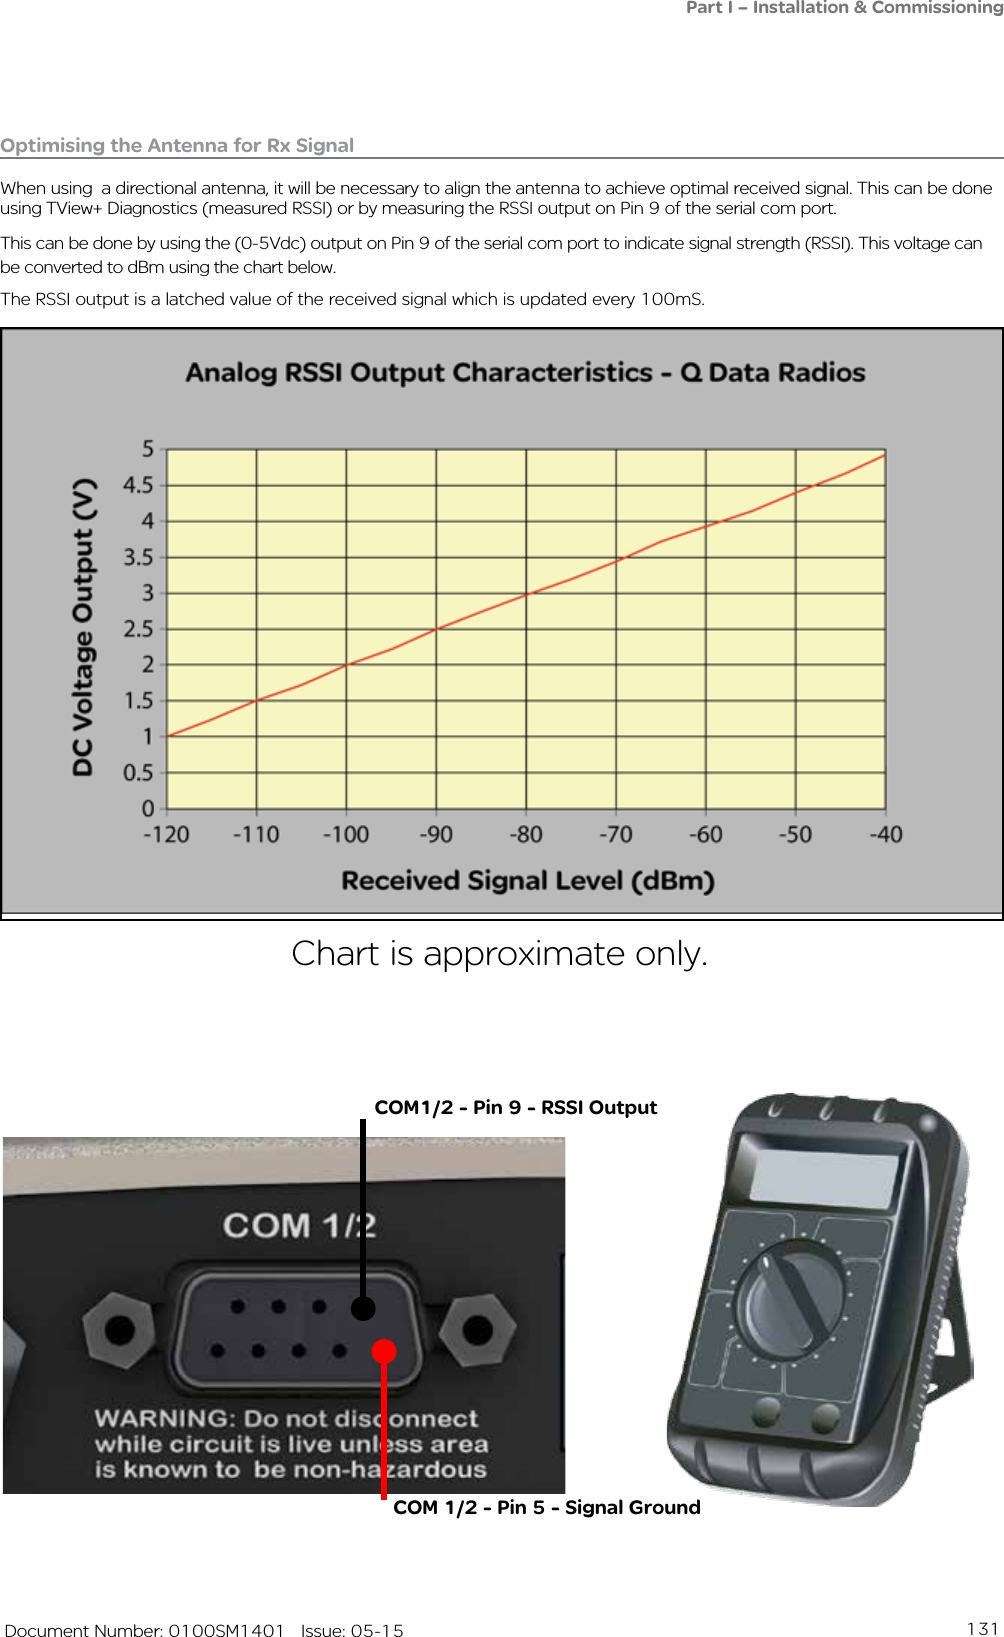 131   Document Number: 0100SM1401   Issue: 05-15Chart is approximate only. COM 1/2 - Pin 5 - Signal GroundCOM1/2 - Pin 9 - RSSI OutputOptimising the Antenna for Rx SignalWhen using  a directional antenna, it will be necessary to align the antenna to achieve optimal received signal. This can be done using TView+ Diagnostics (measured RSSI) or by measuring the RSSI output on Pin 9 of the serial com port.This can be done by using the (0-5Vdc) output on Pin 9 of the serial com port to indicate signal strength (RSSI). This voltage can be converted to dBm using the chart below.The RSSI output is a latched value of the received signal which is updated every 100mS. Part I – Installation &amp; Commissioning